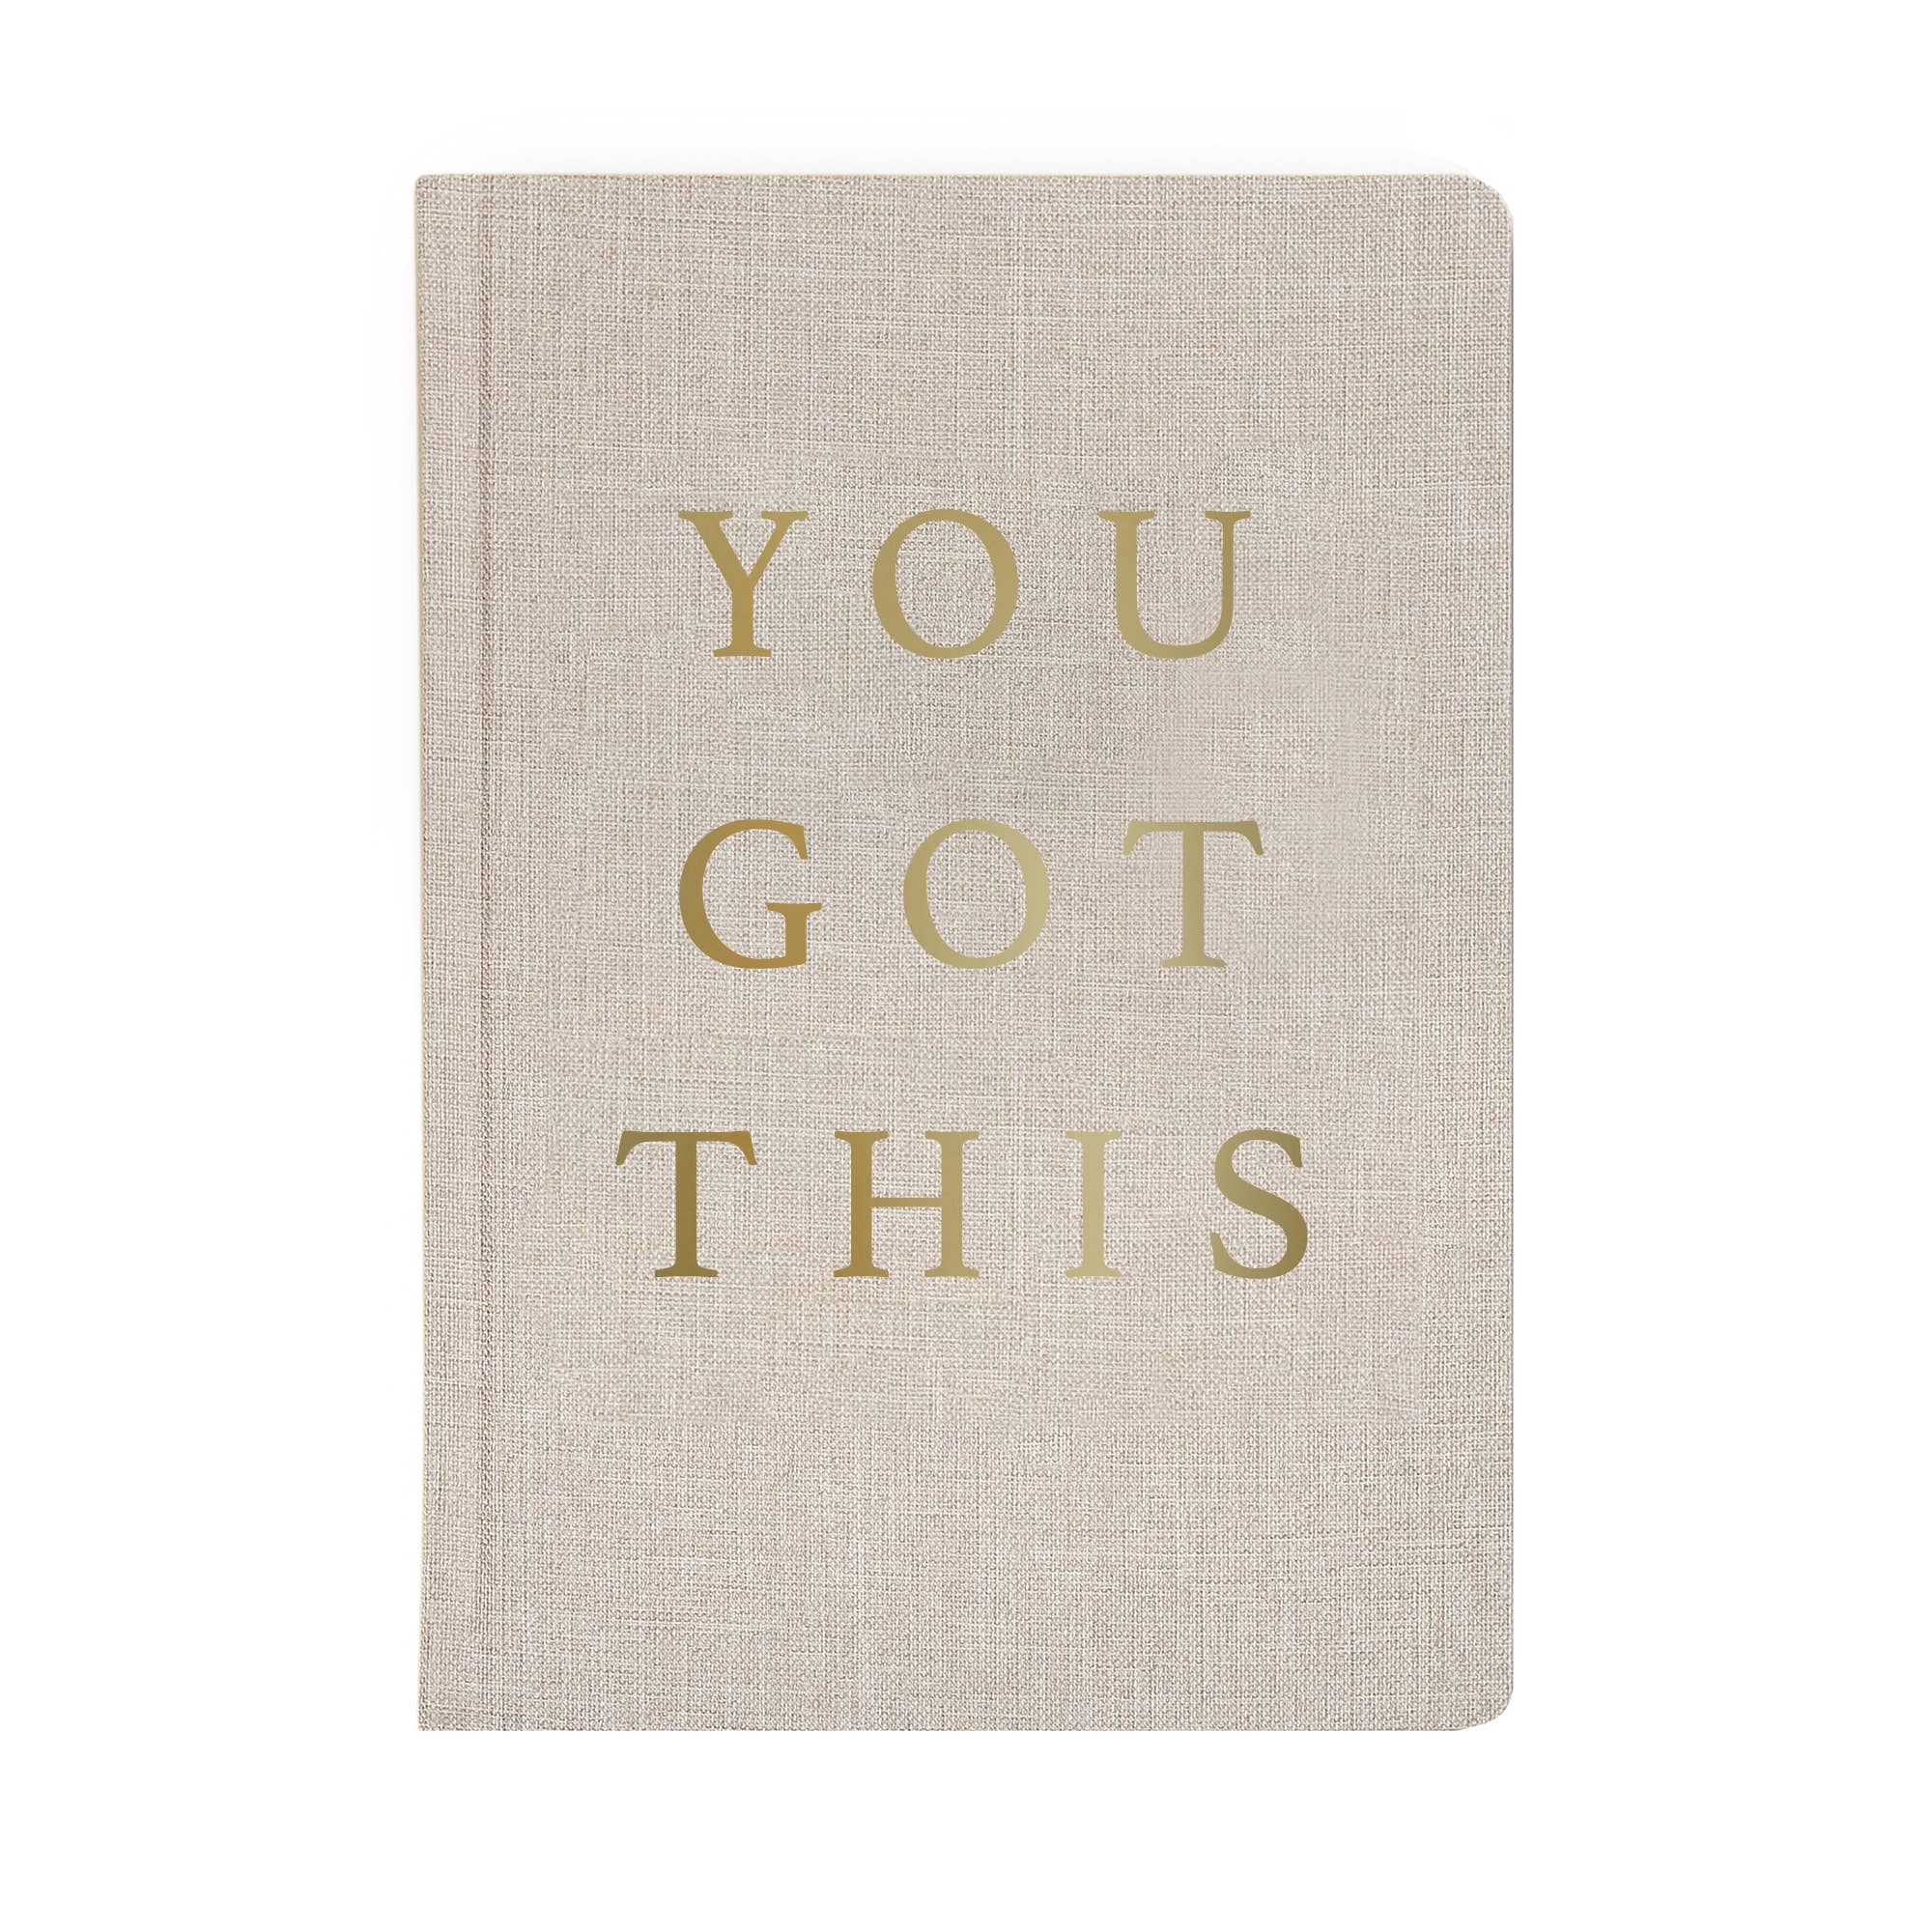 Journal, You Got This - Tan and Gold Foil